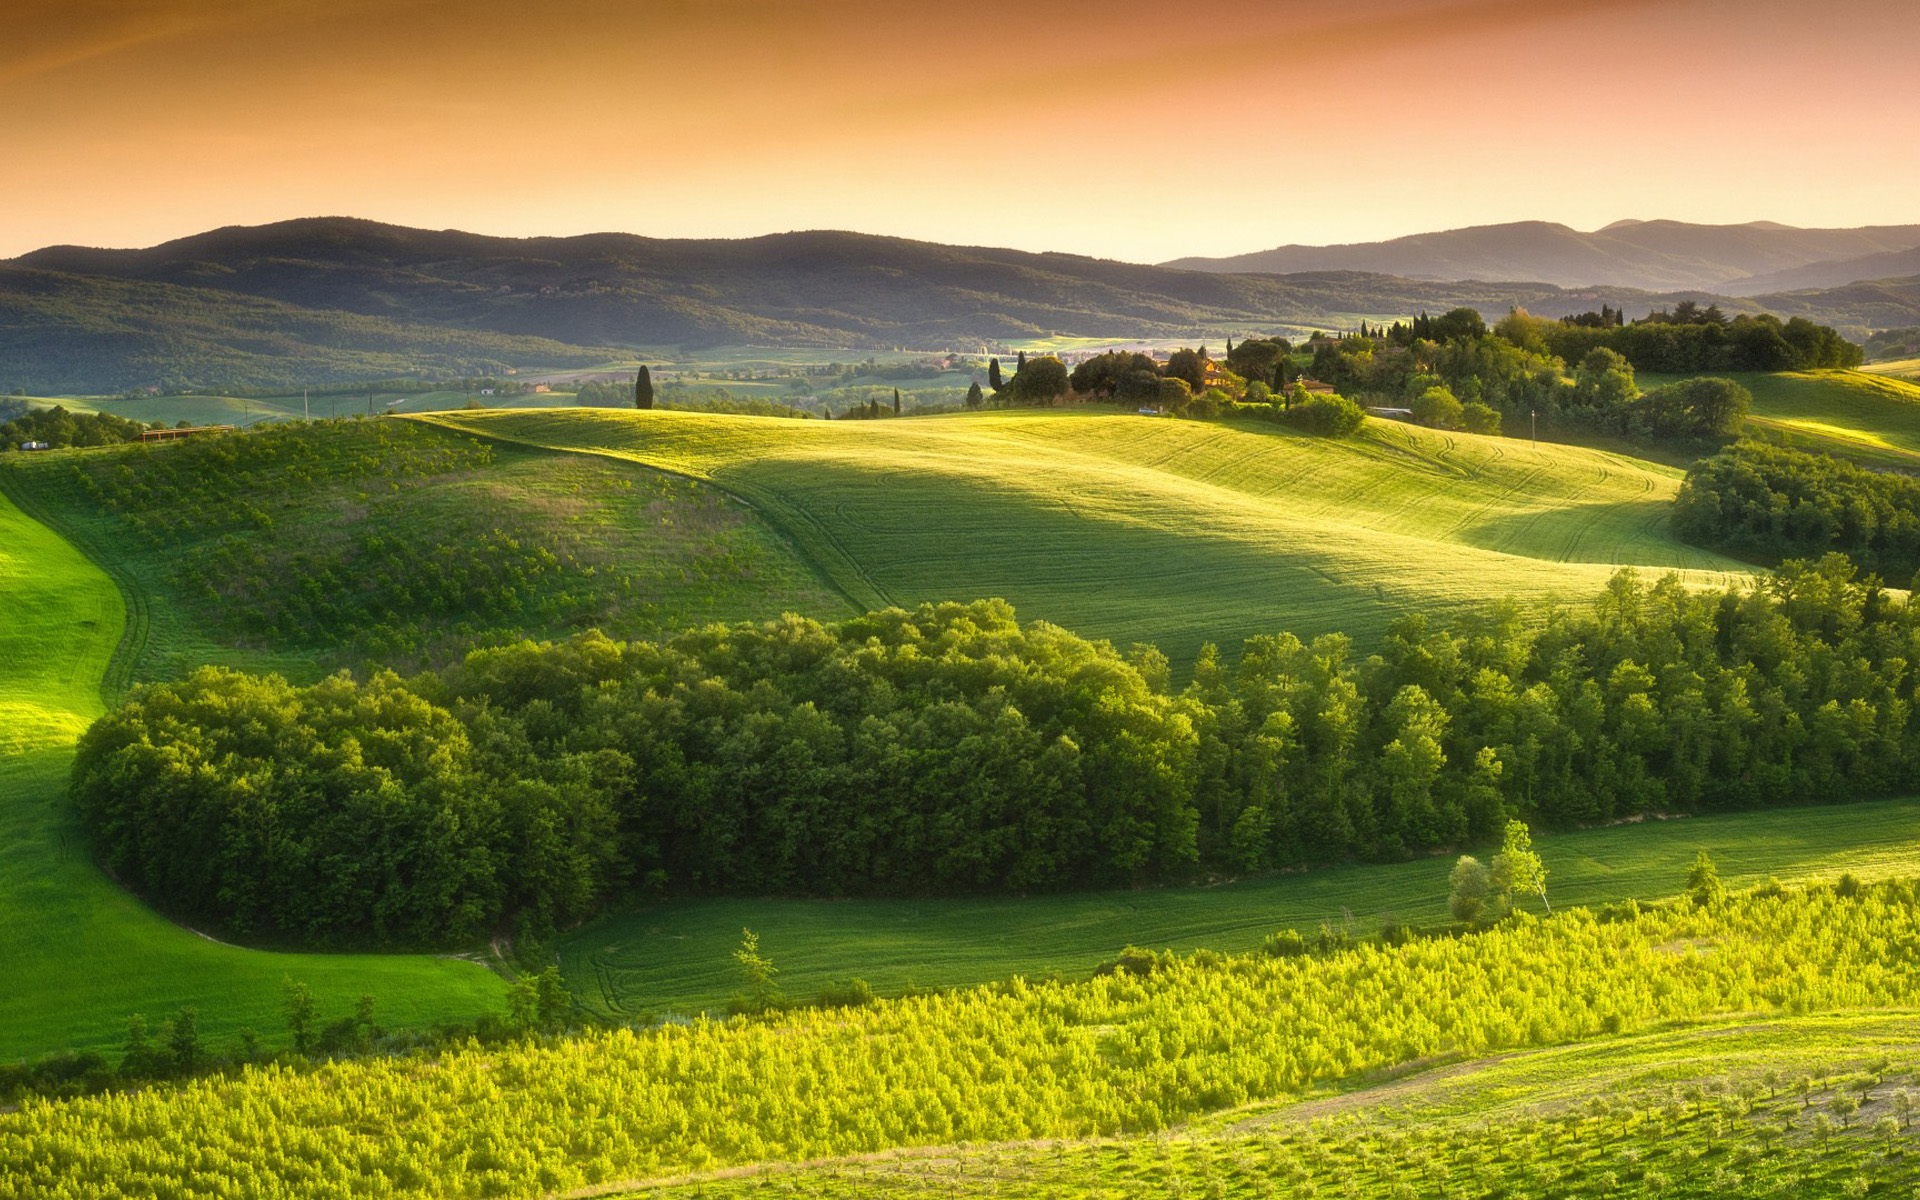 Italy Tuscan countryside HD Wallpapers HD Wallpaper Downloads